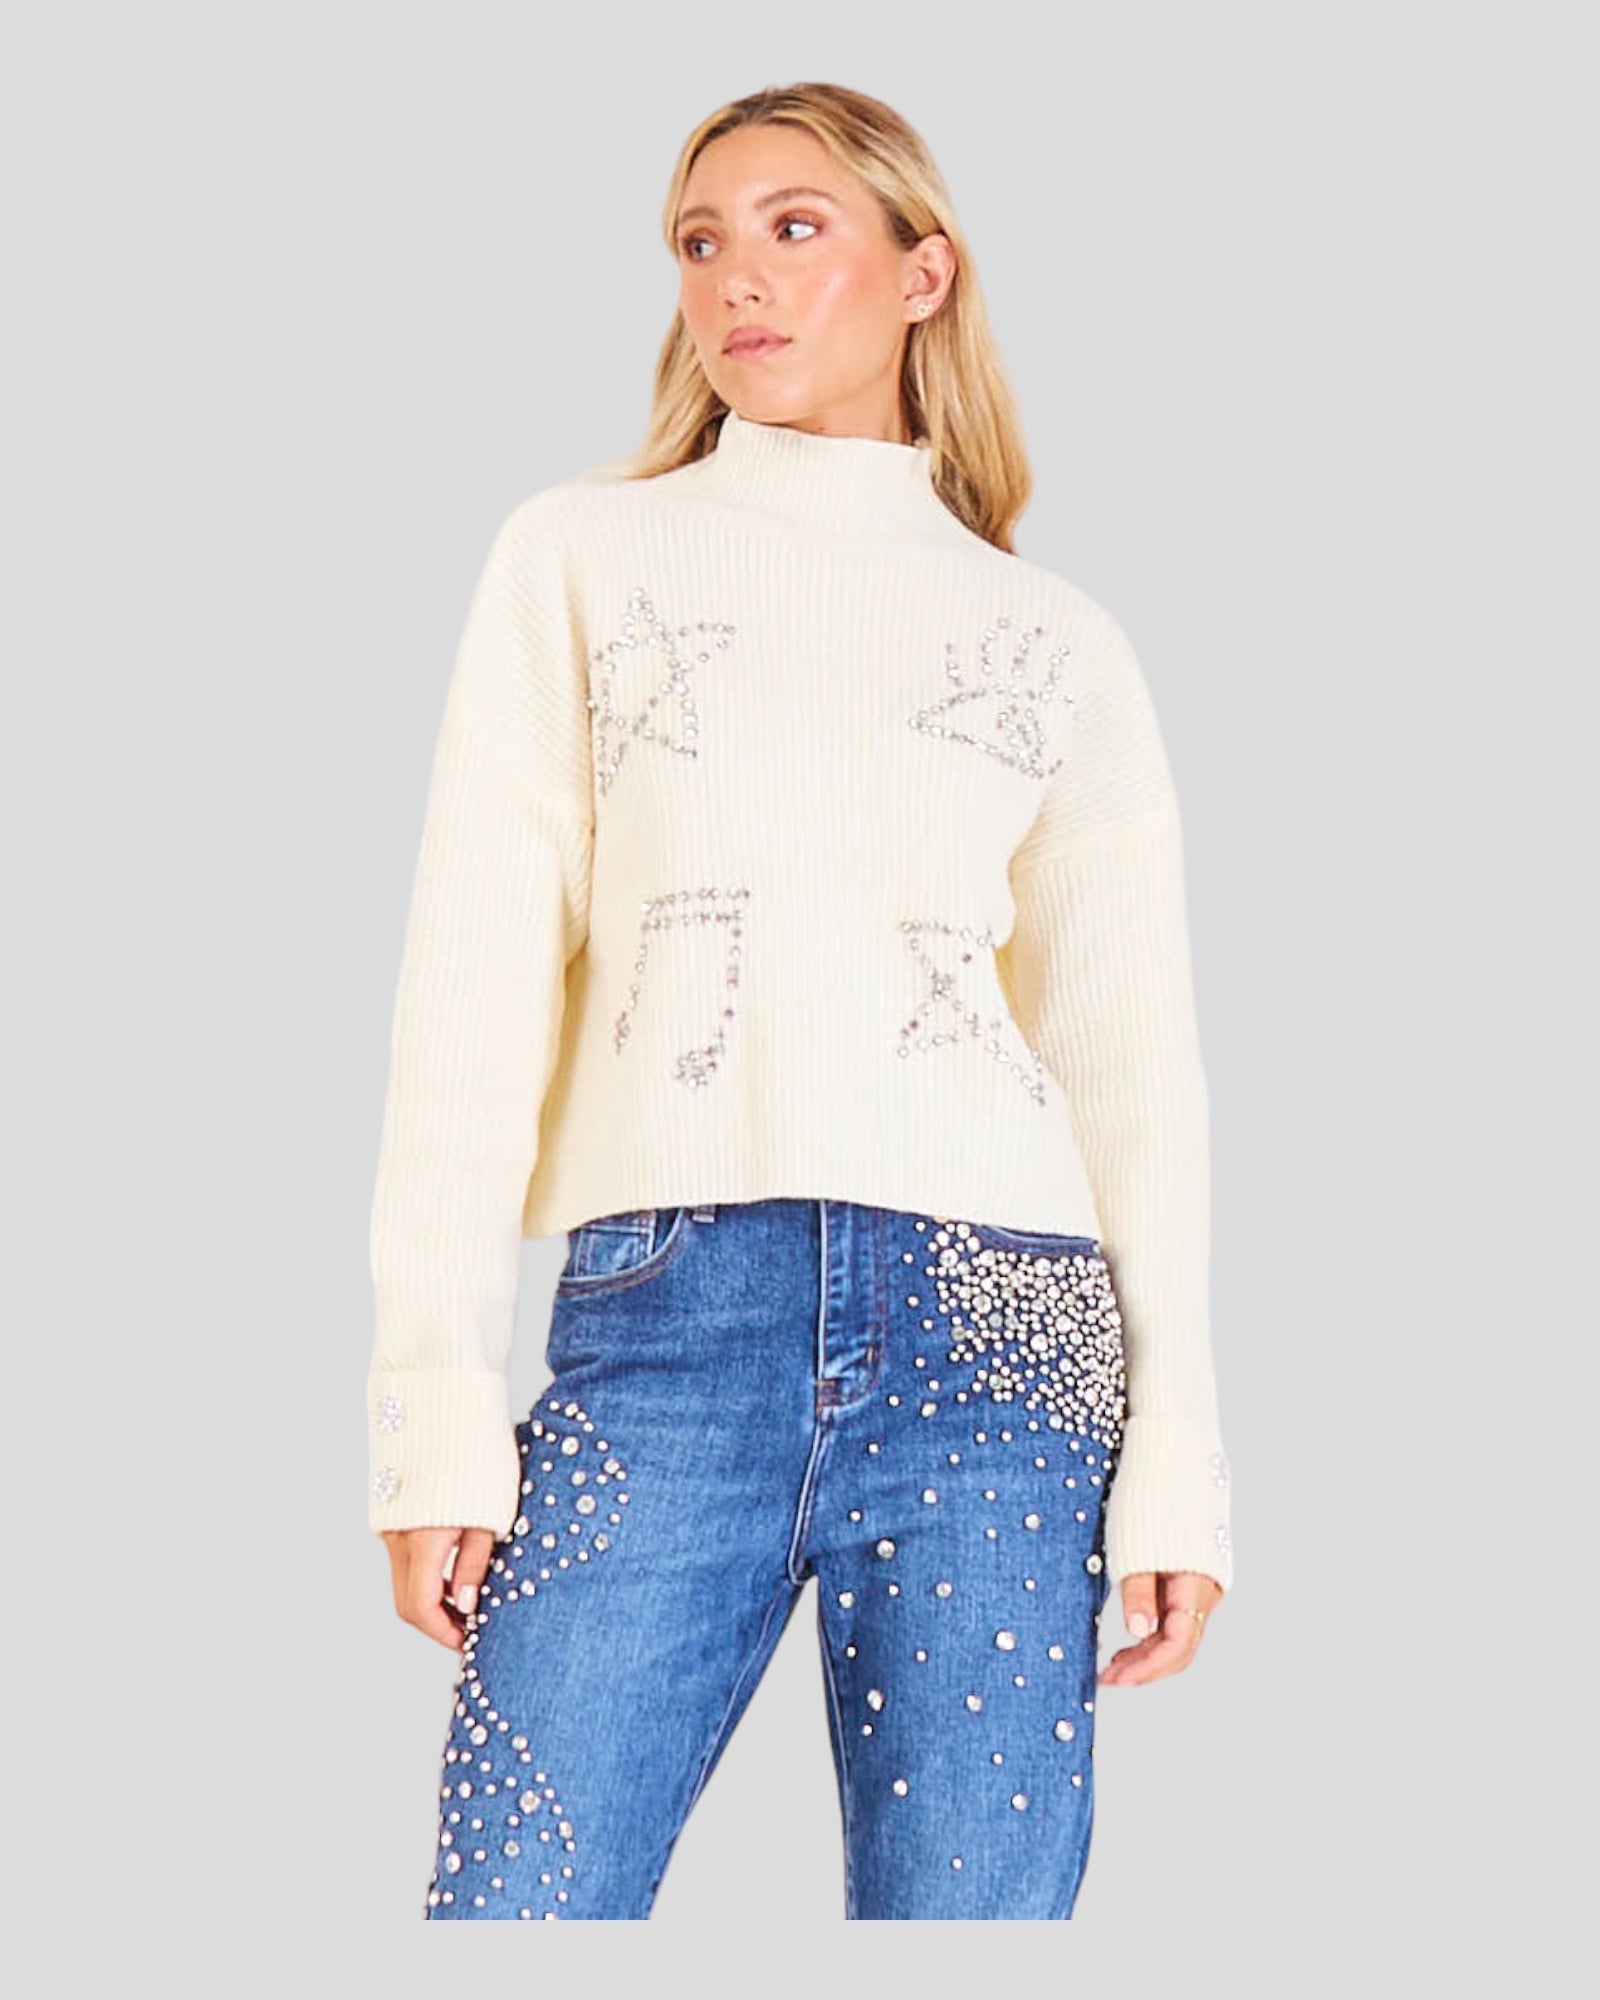 Sweater with a High Neck, Turn-Up Cuffs, and a Comfortable Straight Fit. The sweater is adorned with sparkling rhinestone applications on the front, and two large rhinestone buttons grace the turned cuffs, adding a touch of glamour. 